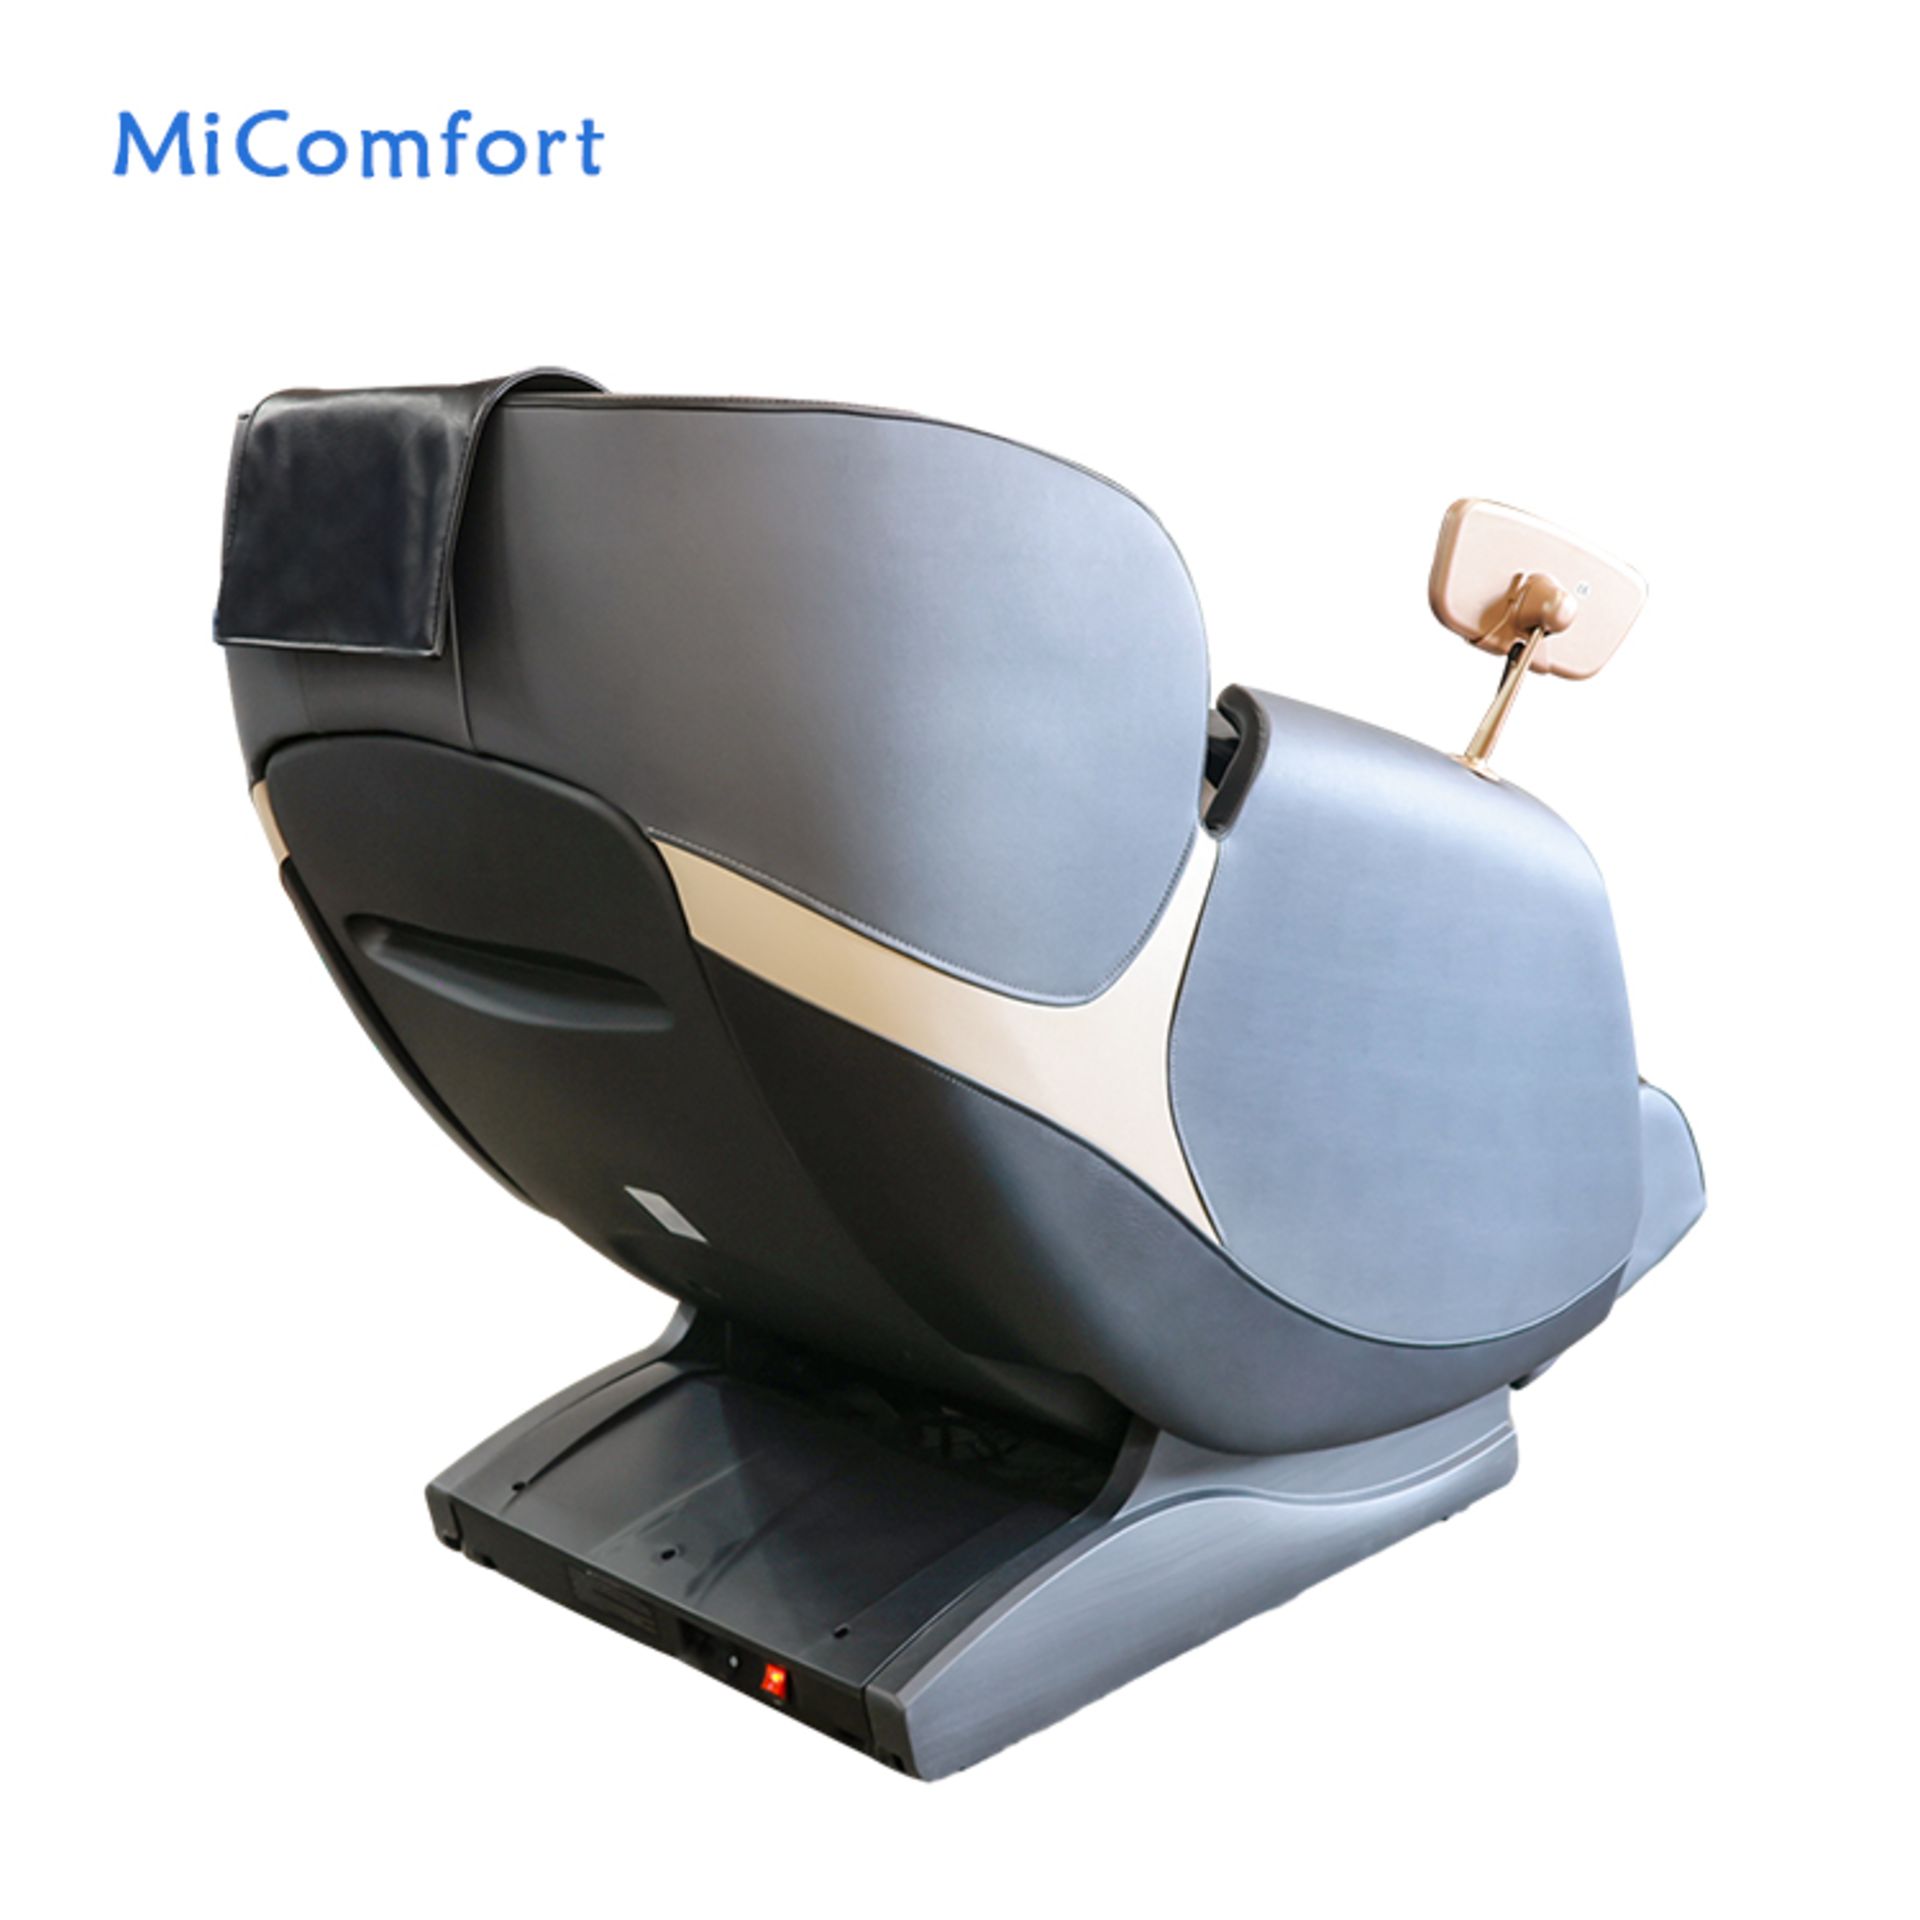 Brand New in Box Orchid MiComfort Full Body Massage Chair *NO VAT* - Image 3 of 13